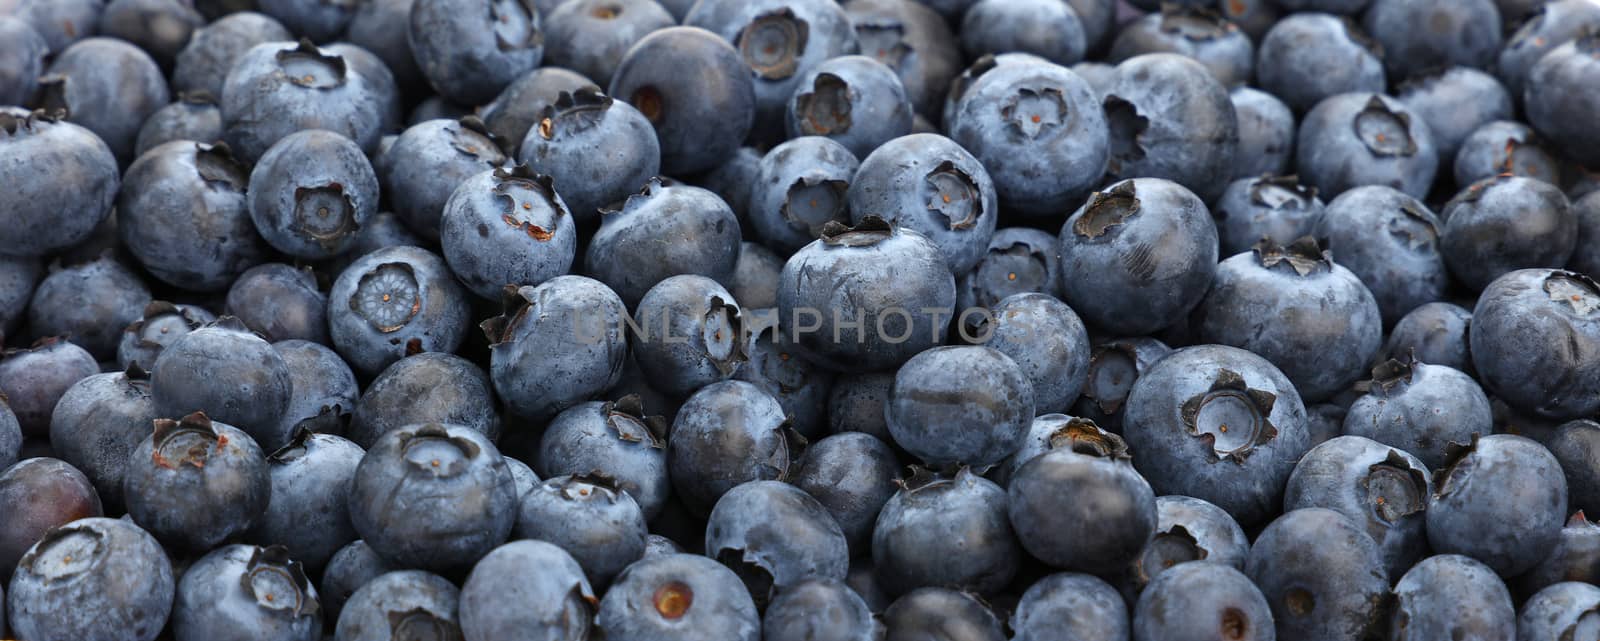 Fresh blueberry berries background pattern close up, low angle view